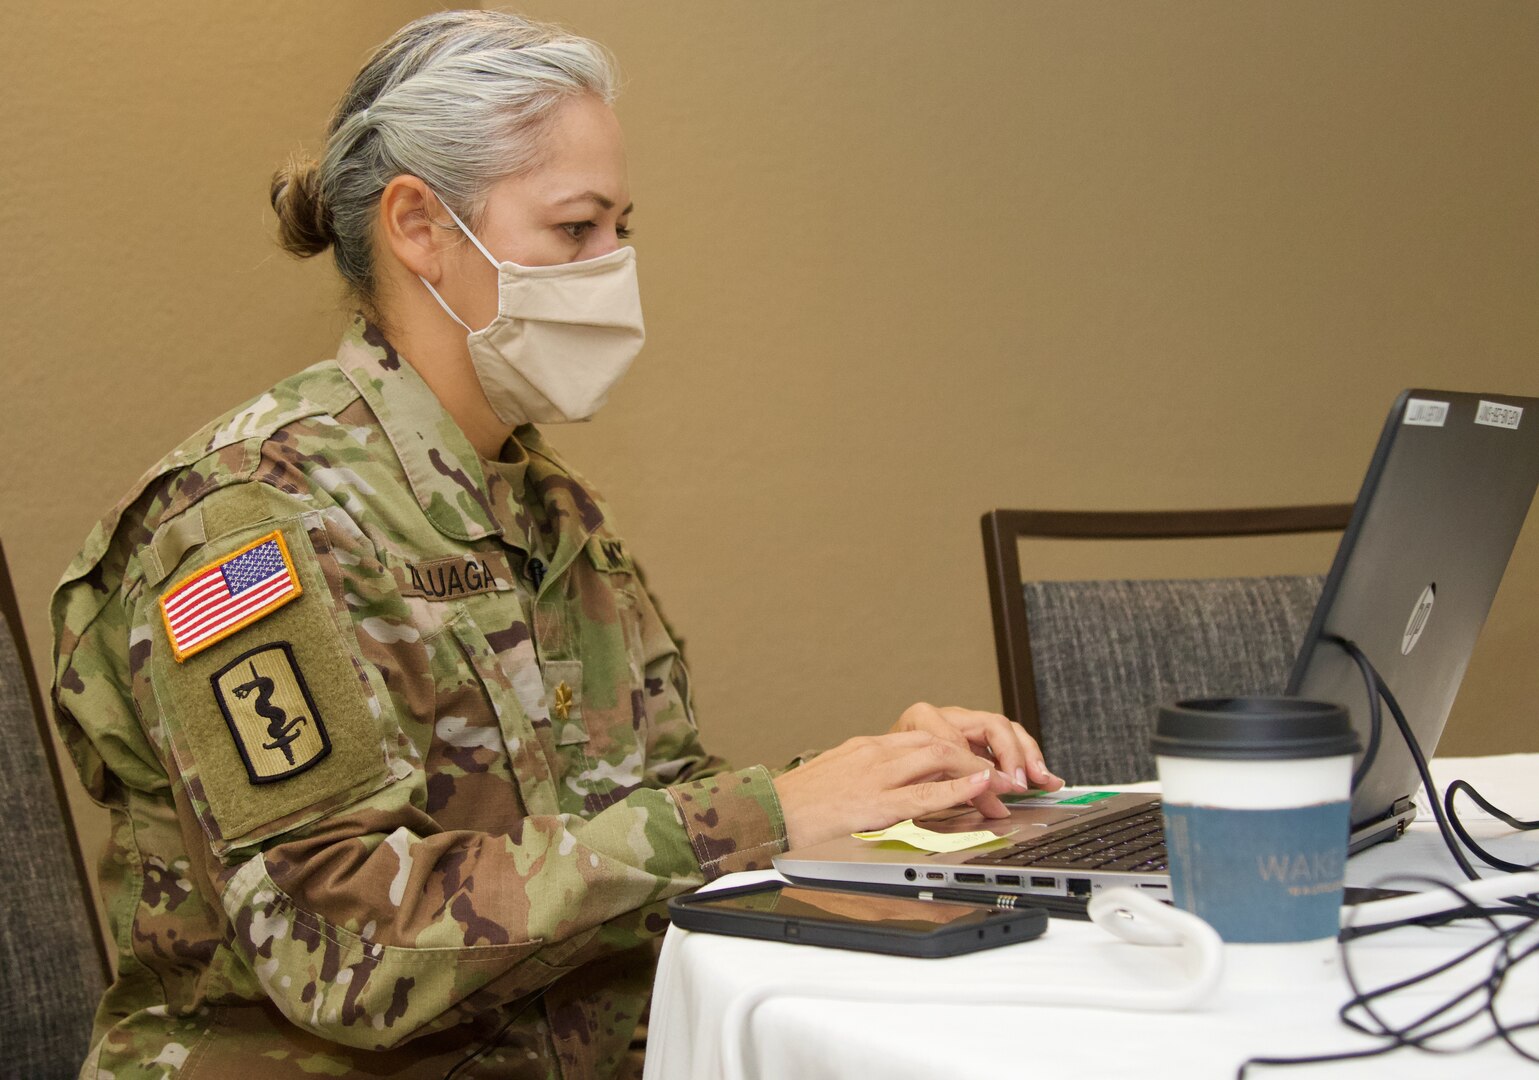 Florida National Guard Maj. Jacqueline S. Zuluaga, 256th Medical Company Area Support company commander, works on mission requirements for scheduling of long-term care facility COVID-19 testing. The FLNG is working closely with federal, state and local partners during the pandemic.